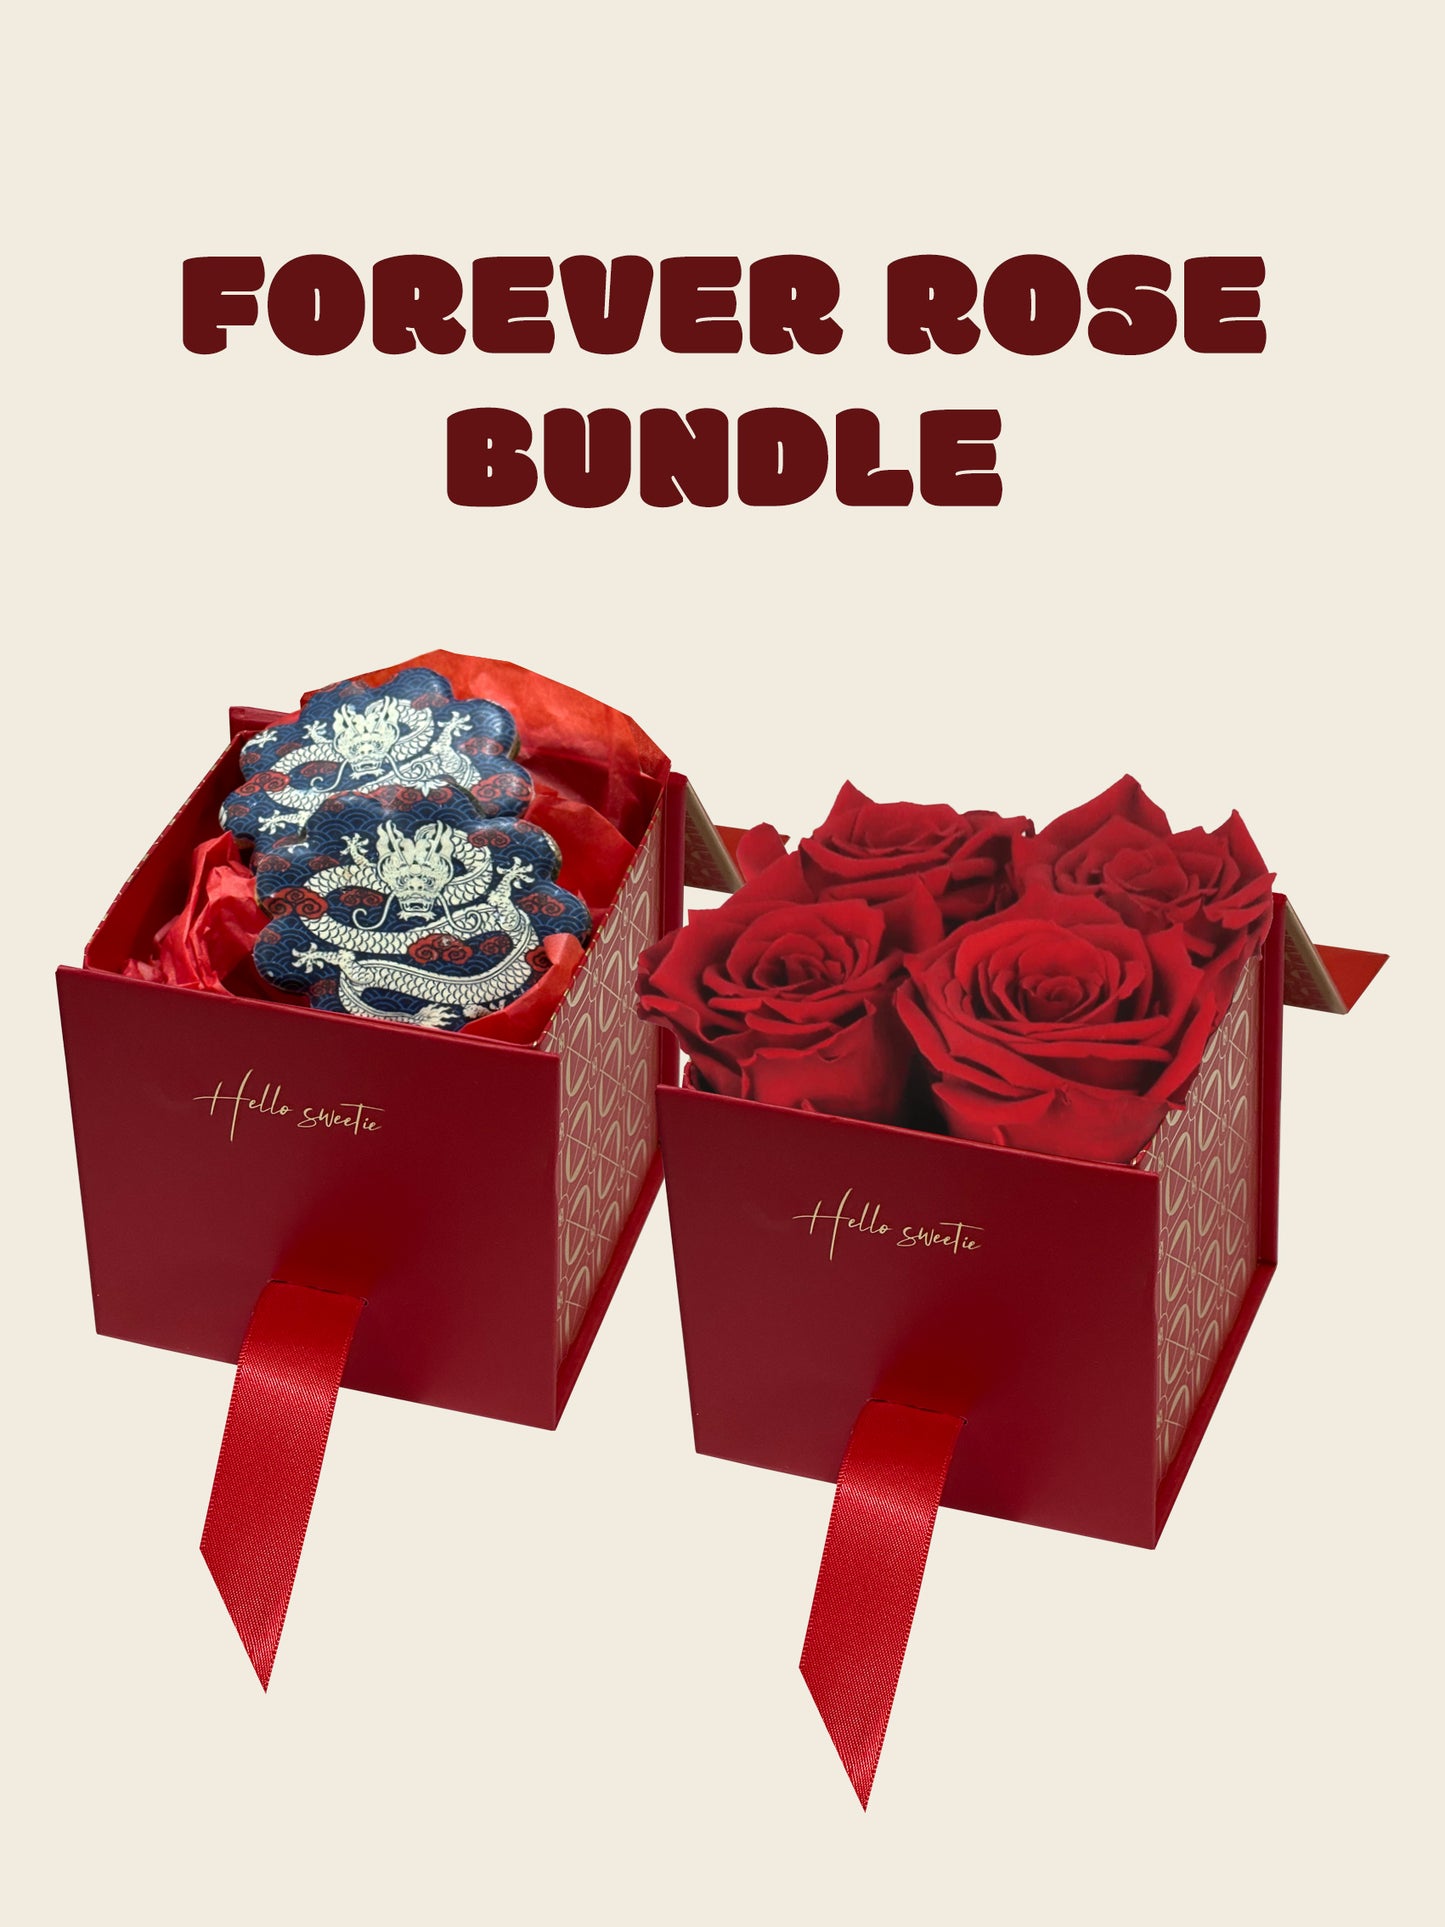 YD2R - Lunar New Year - the Dragon Speculoos biscuits with Forever roses and  Red envelope